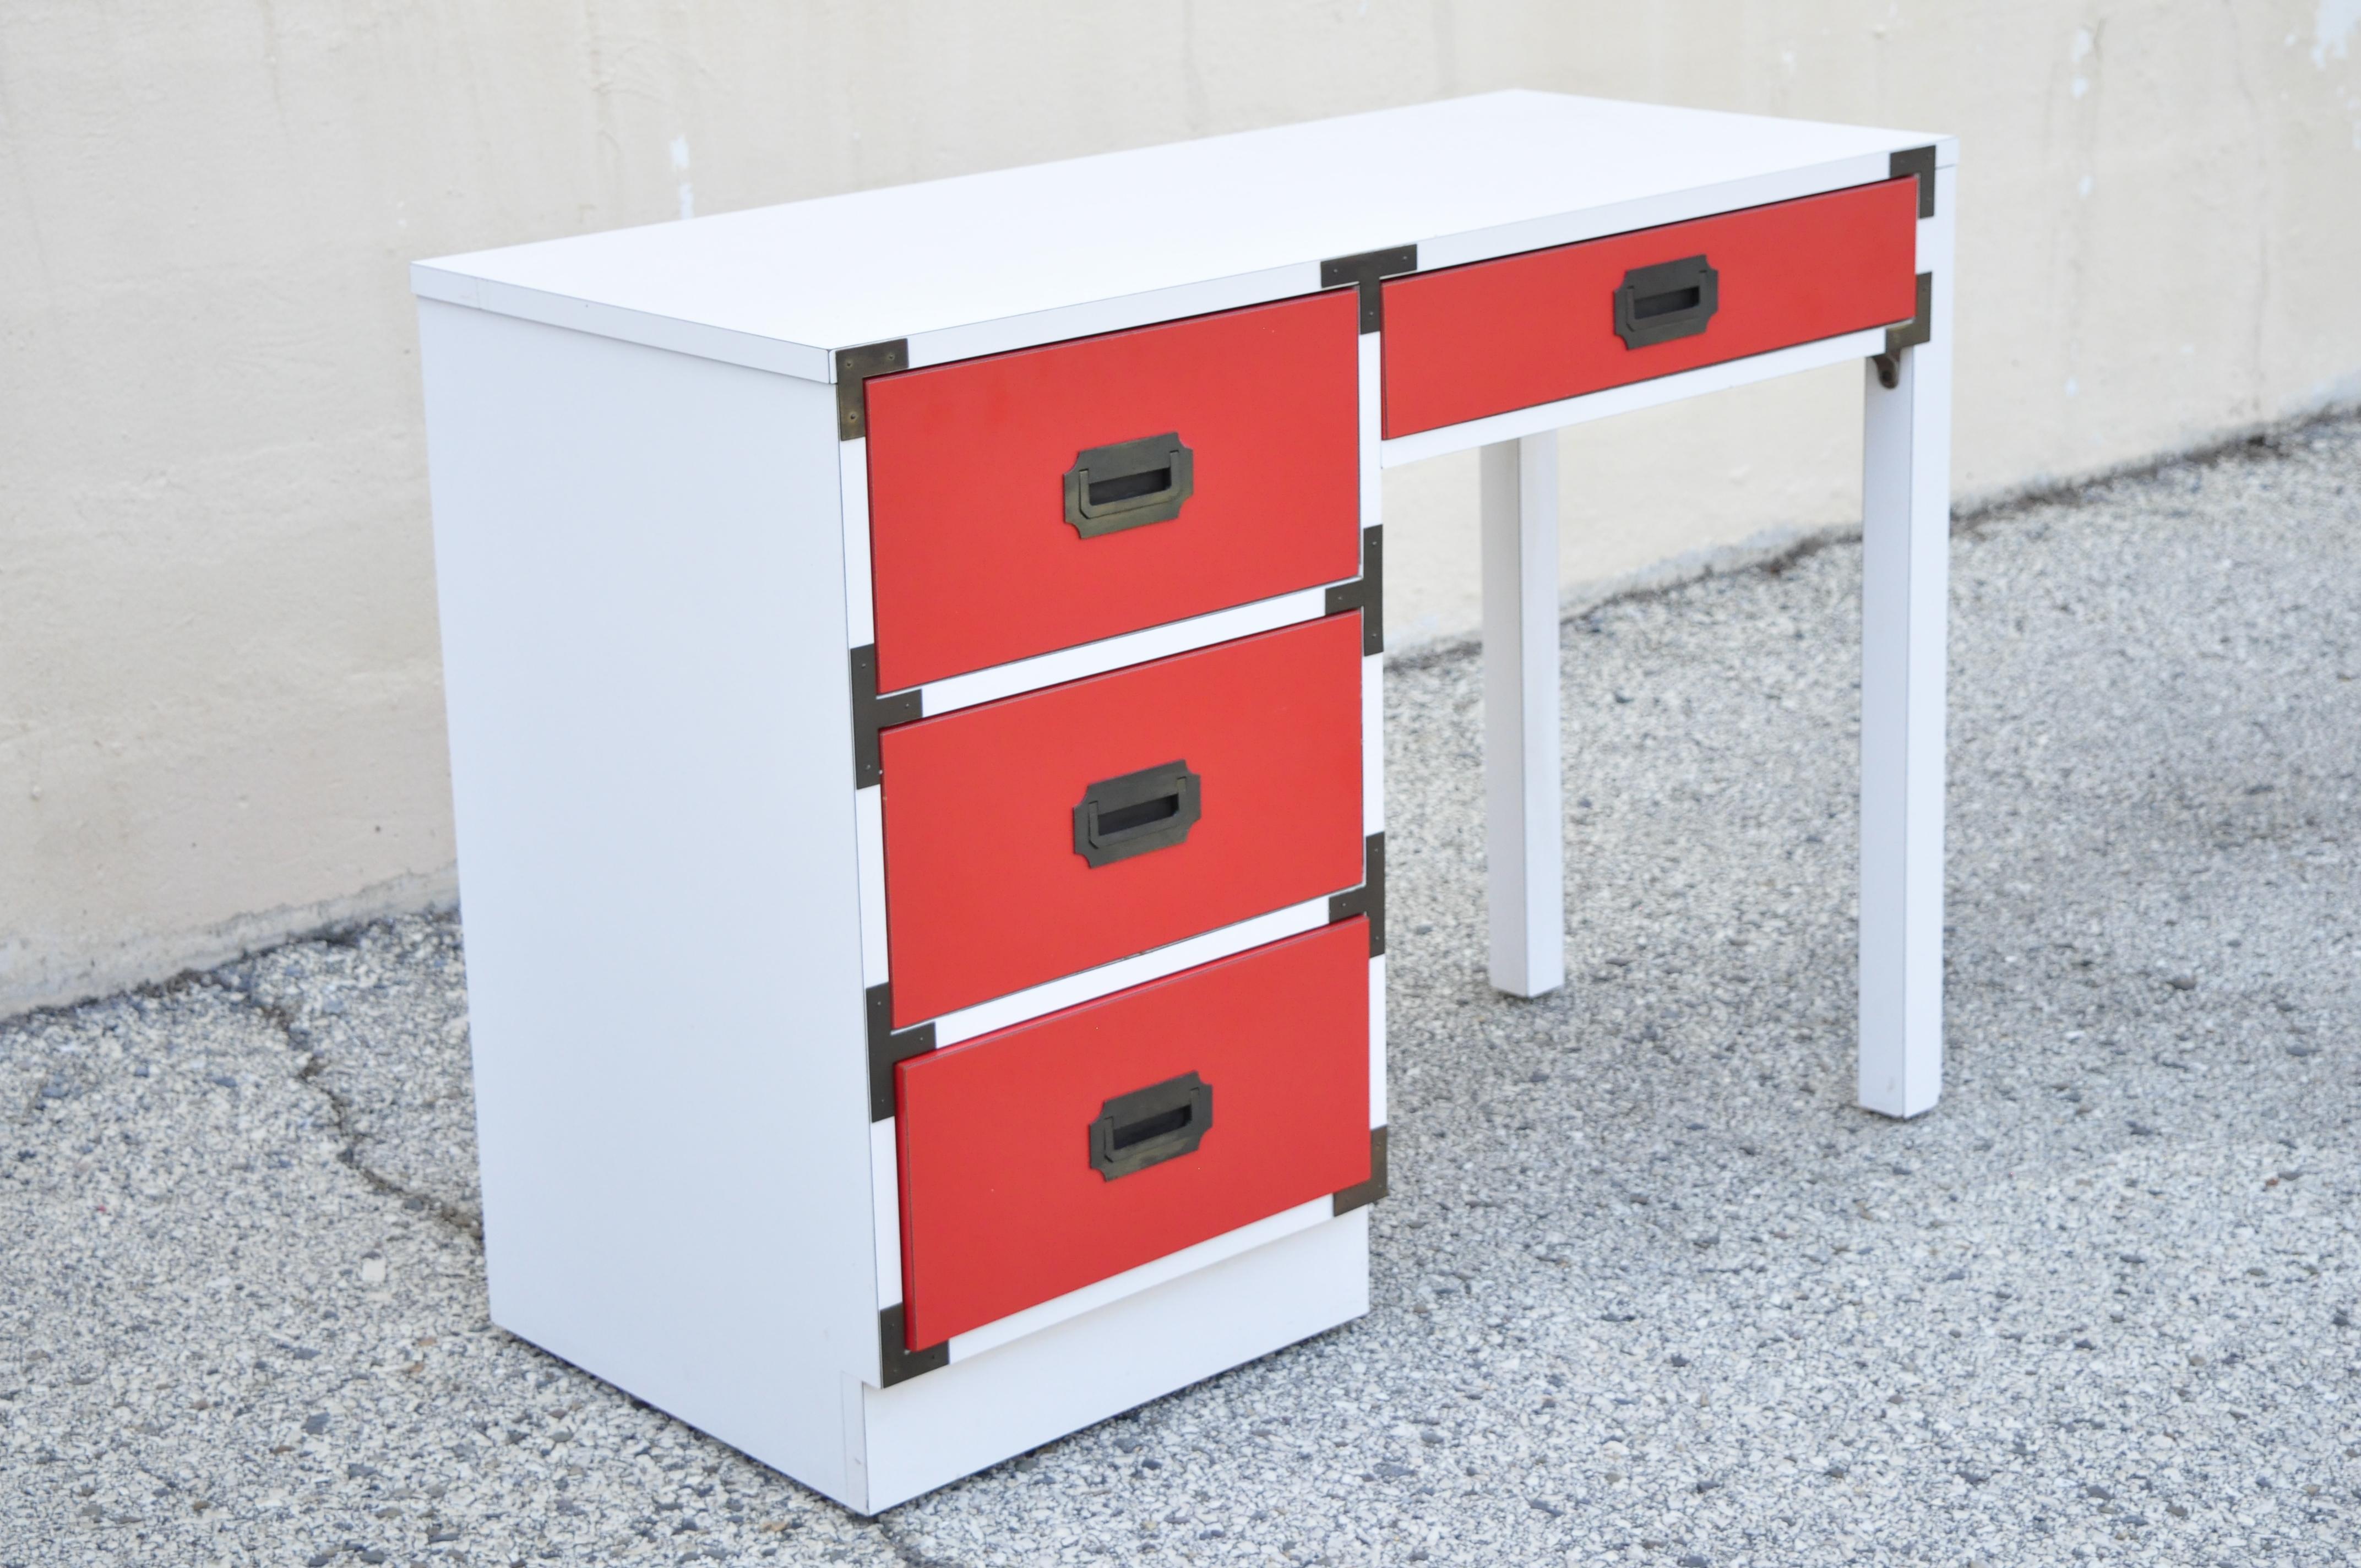 Vintage Modern Campaign style red white Formica Hollywood Regency writing desk. Item features formica wrapped white case, red formica drawer fronts, campaign style drawer pulls, 4 drawers, brass hardware, clean modernist lines, great style and form.